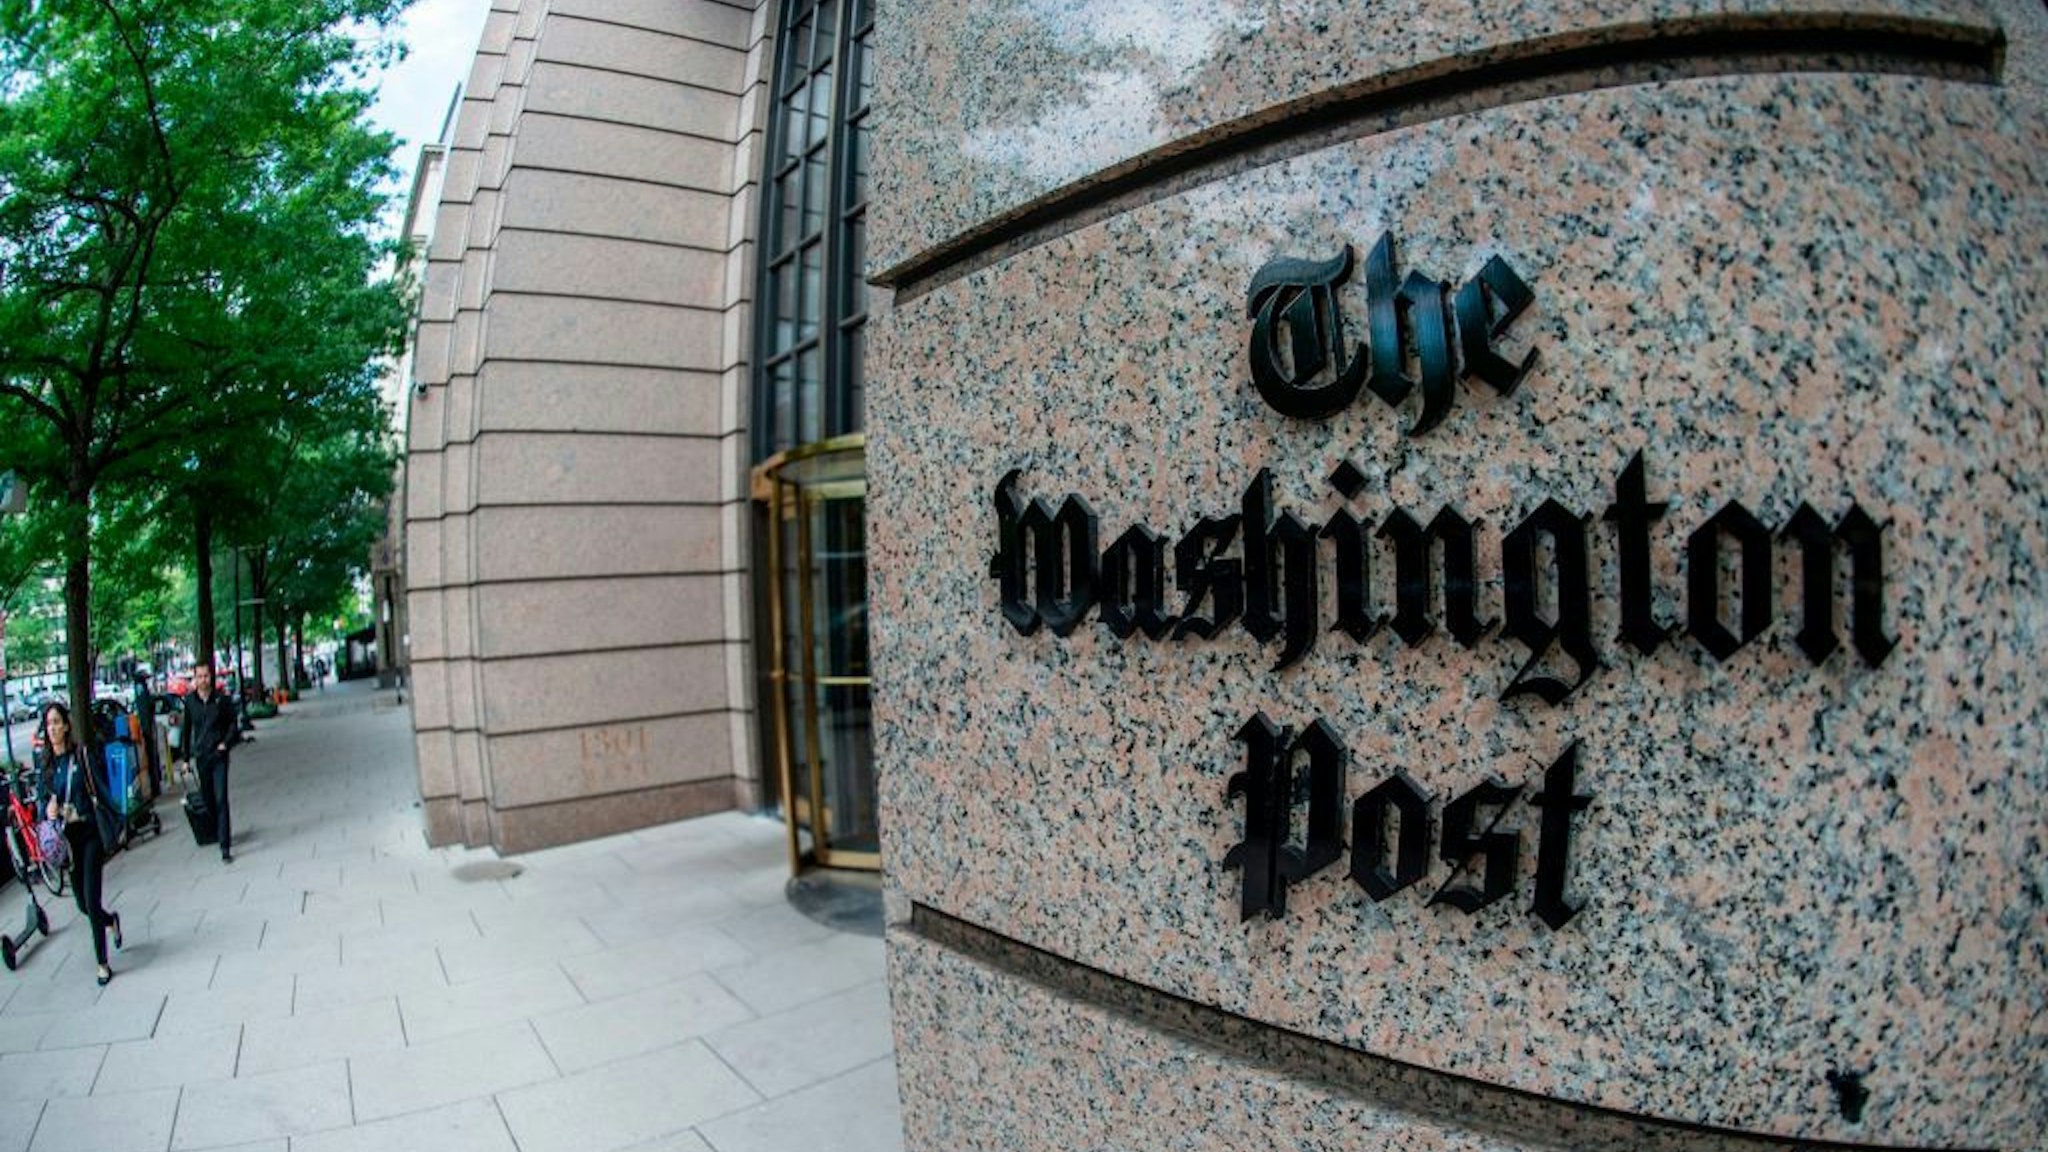 The building of the Washington Post newspaper headquarter is seen on K Street in Washington DC on May 16, 2019. - The Washington Post is a major American daily newspaper published in Washington, D.C., with a particular emphasis on national politics and the federal government. It has the largest circulation in the Washington metropolitan area. (Photo by Eric BARADAT / AFP) (Photo credit should read ERIC BARADAT/AFP via Getty Images)